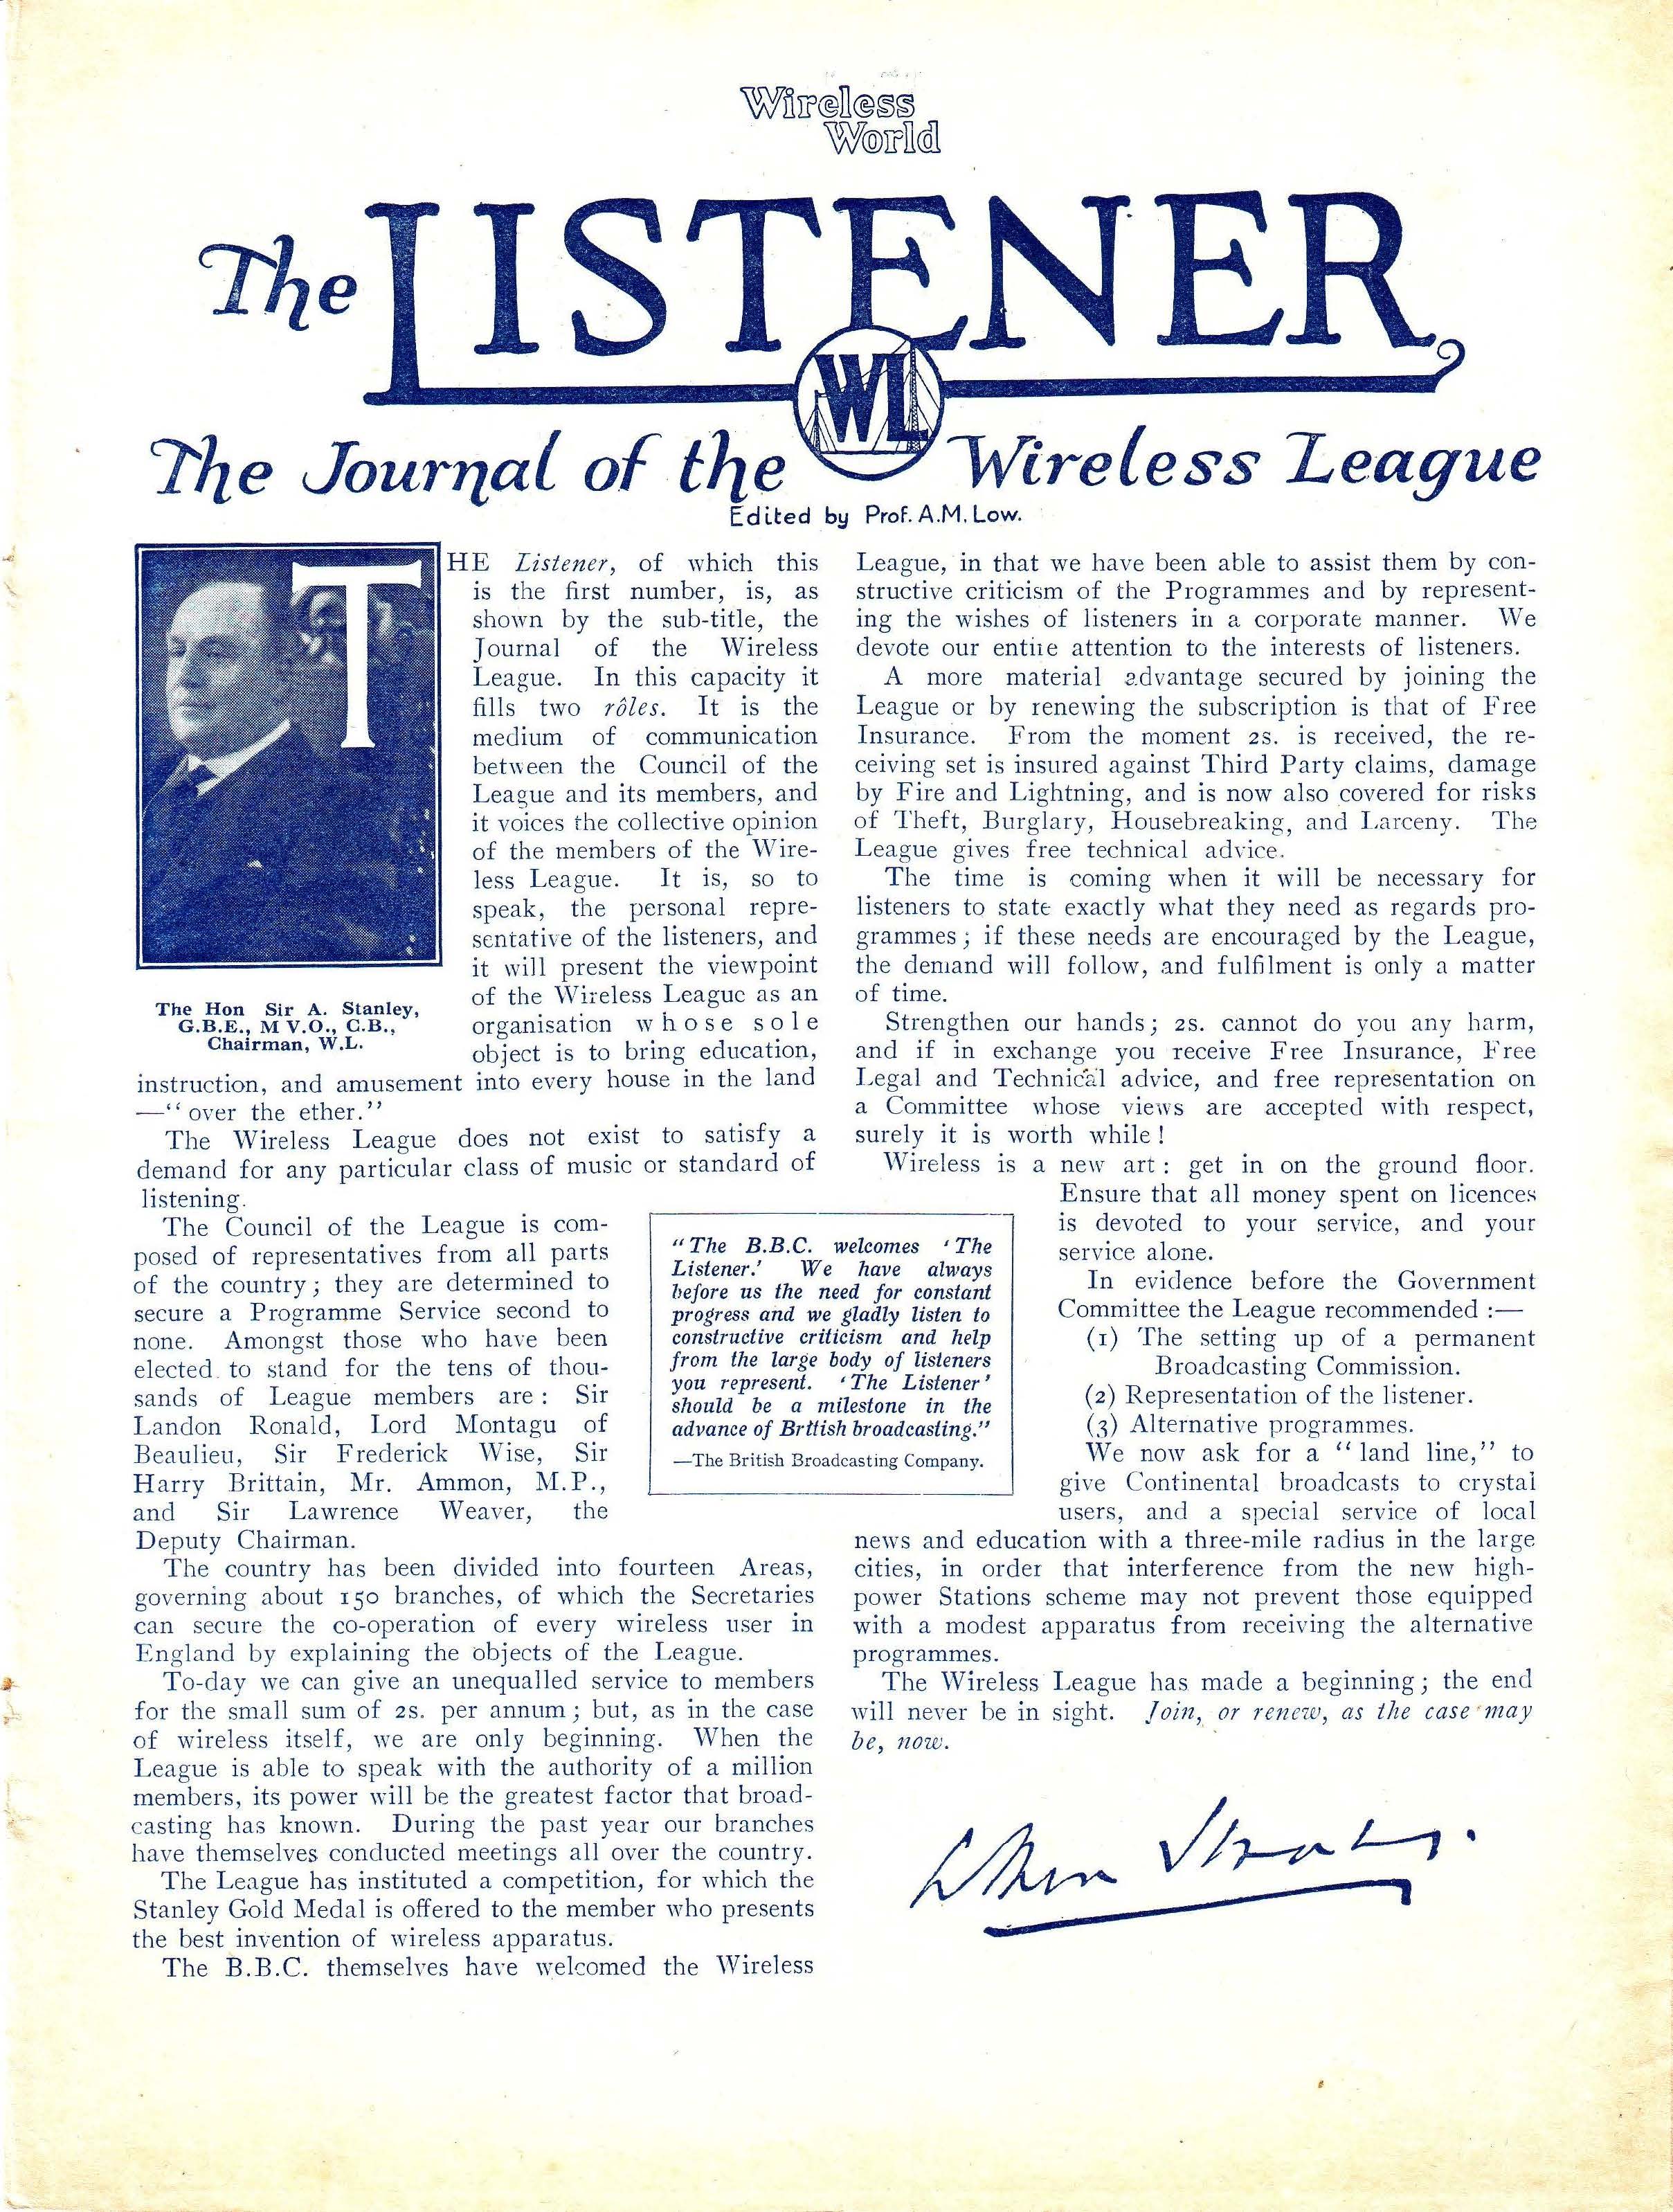 Image of the first page of an issue of The Listener